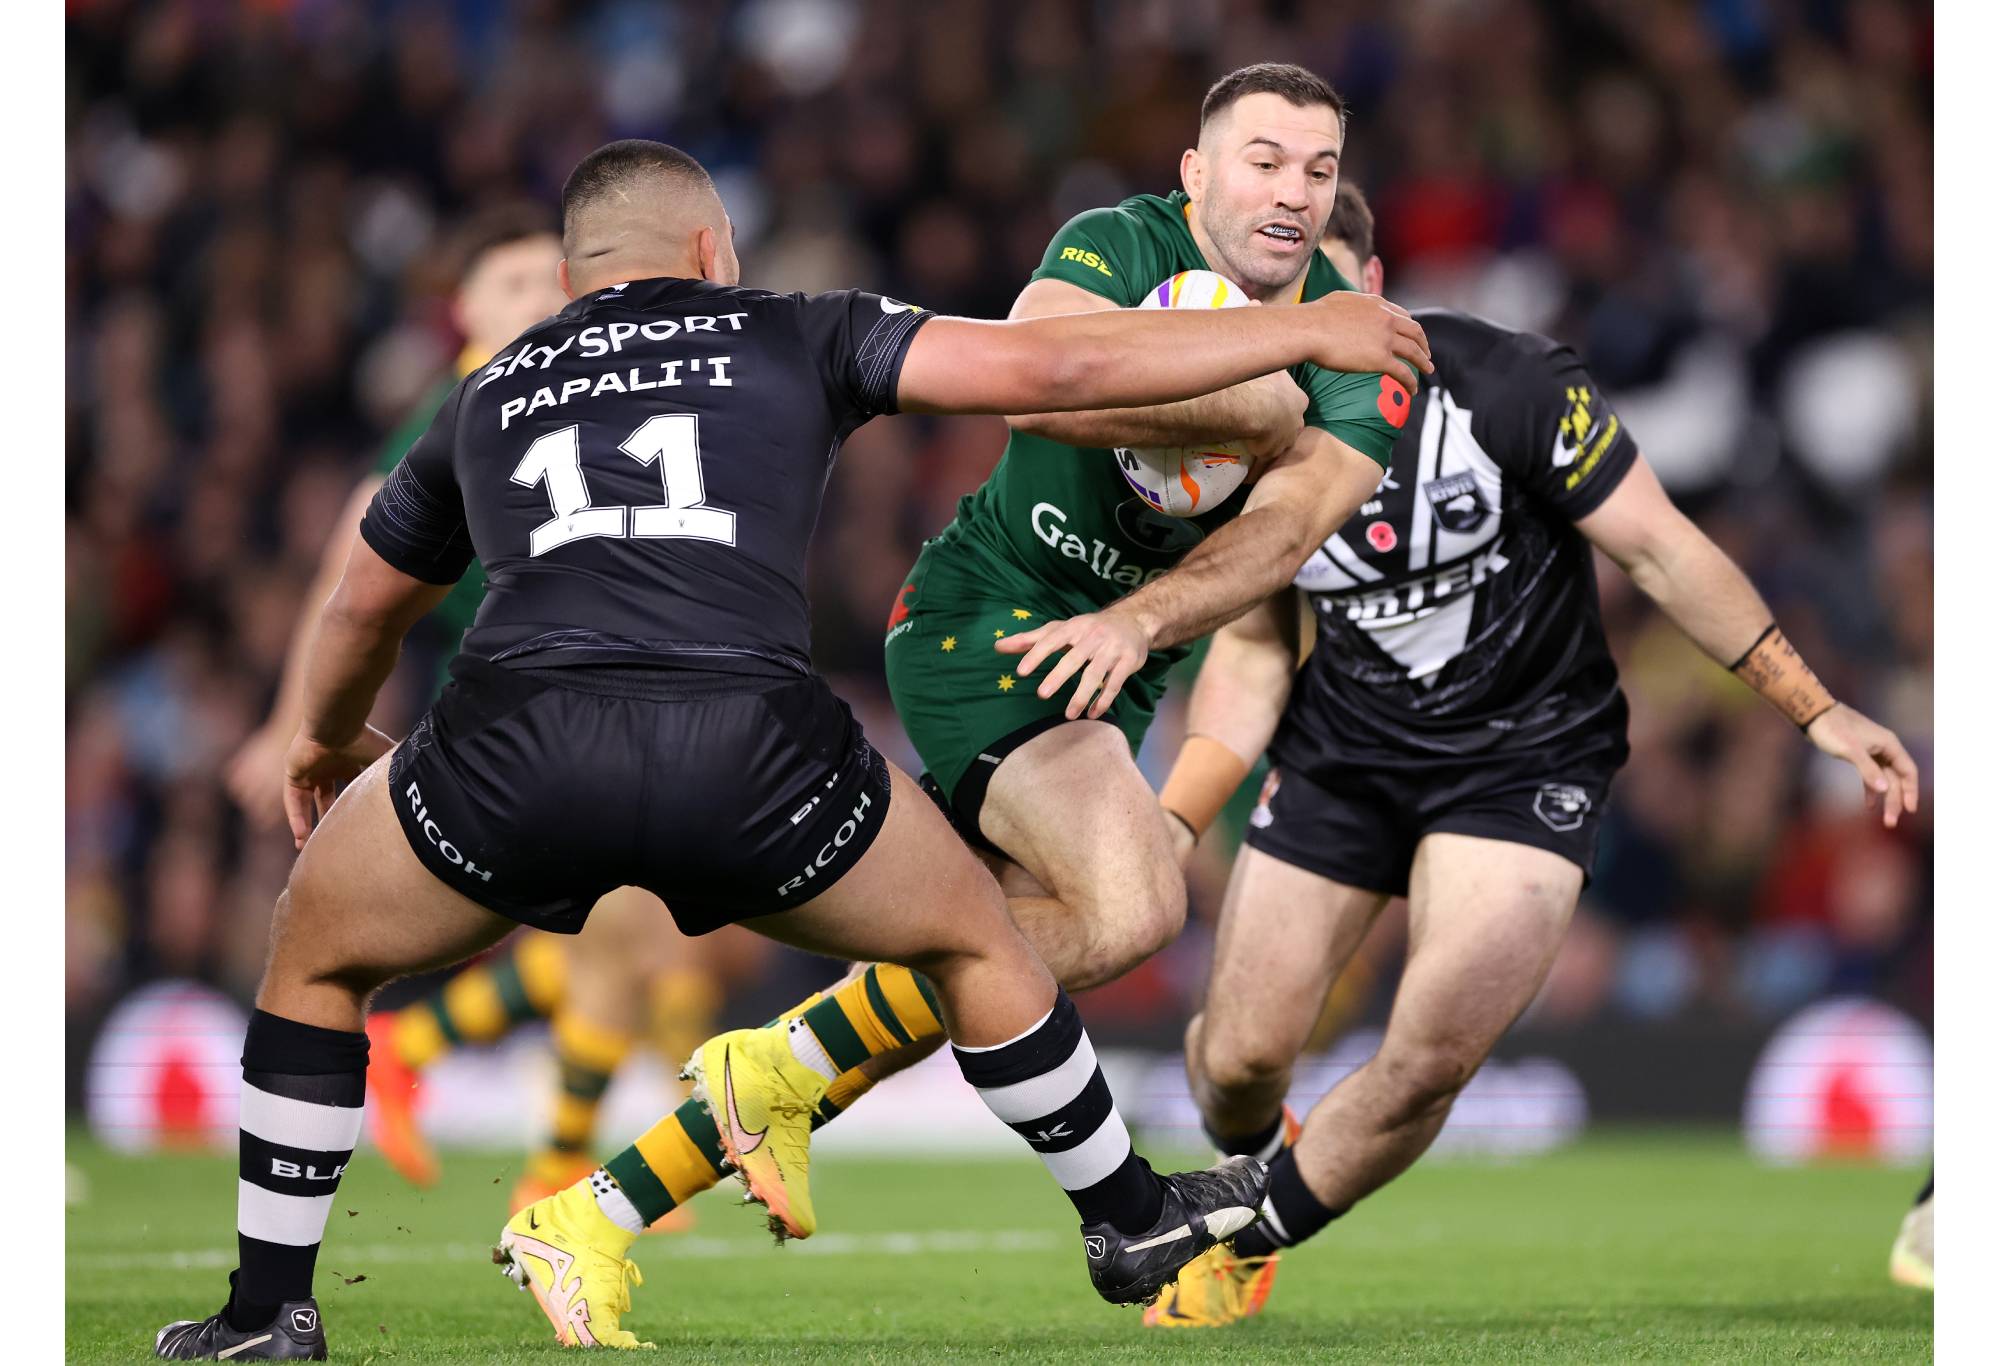 LEEDS, ENGLAND - NOVEMBER 11: James Tedesco of Australia looks to break past Isaiah Papalii of New Zealand during the Rugby League World Cup Semi-Final match between Australia and New Zealand at Elland Road on November 11, 2022 in Leeds, England. (Photo by Alex Livesey/Getty Images for RLWC)